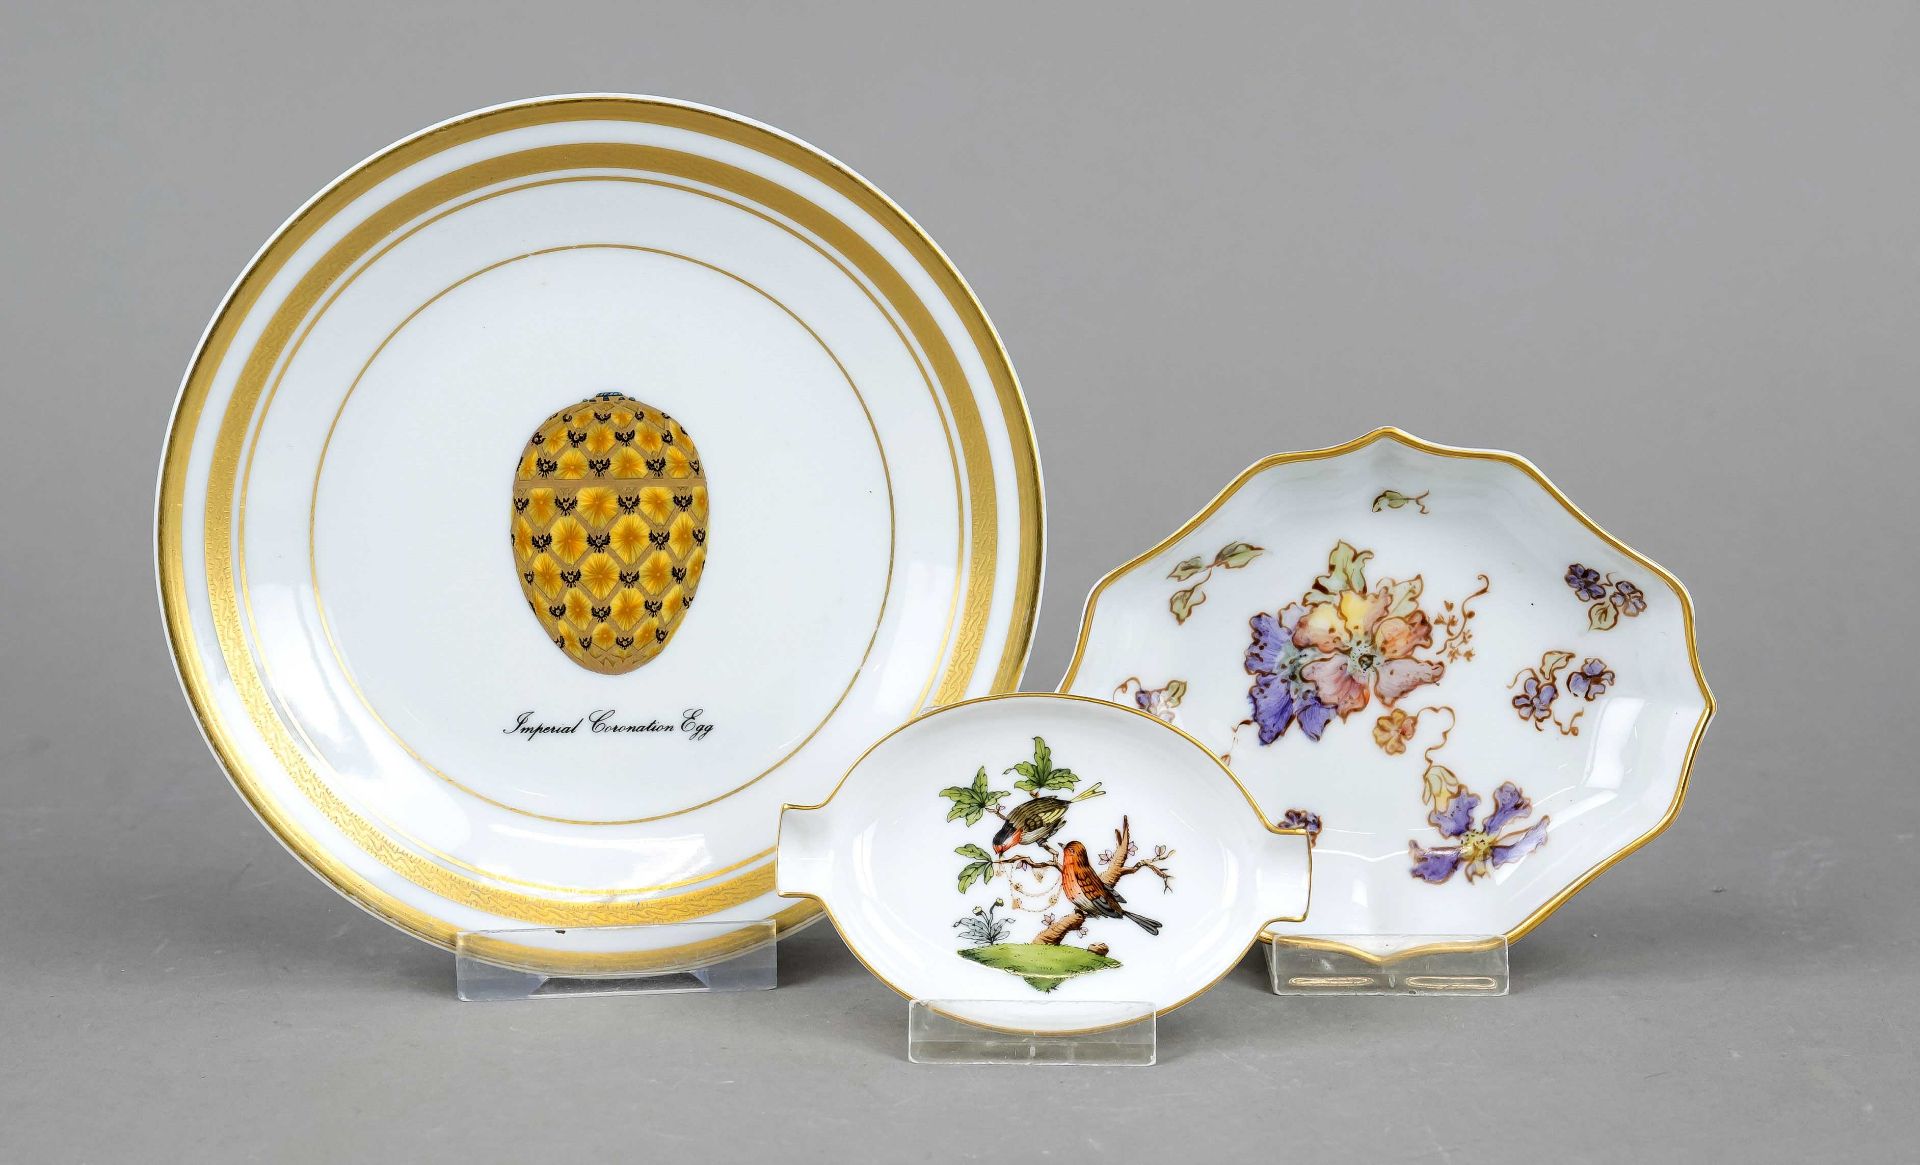 Three bowls, late 20th c., small plate, Limoges, France, Faberge design, Imperial Coranation Egg, in